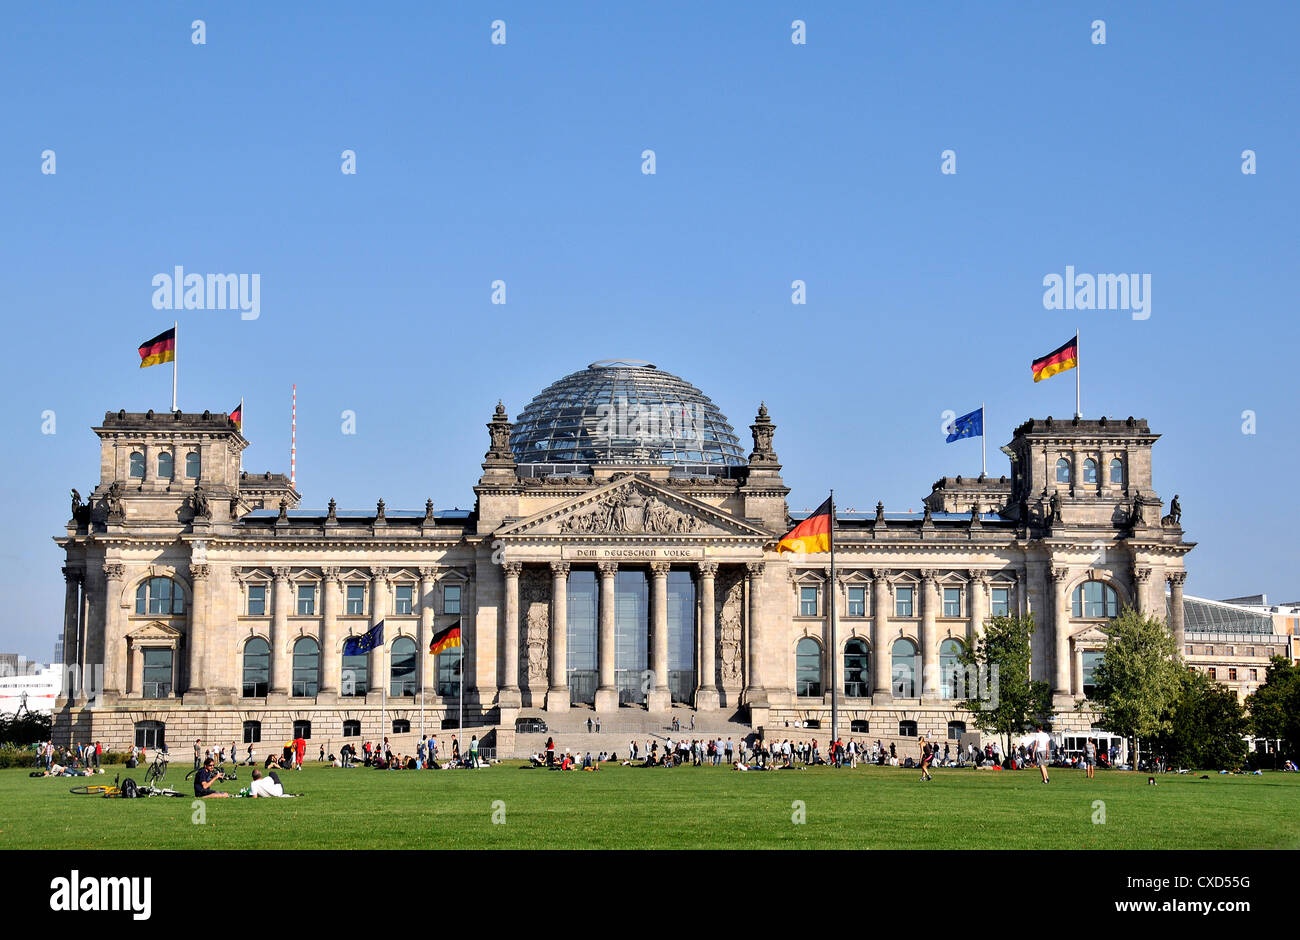 Reichstag Berlin Germany Stock Photo